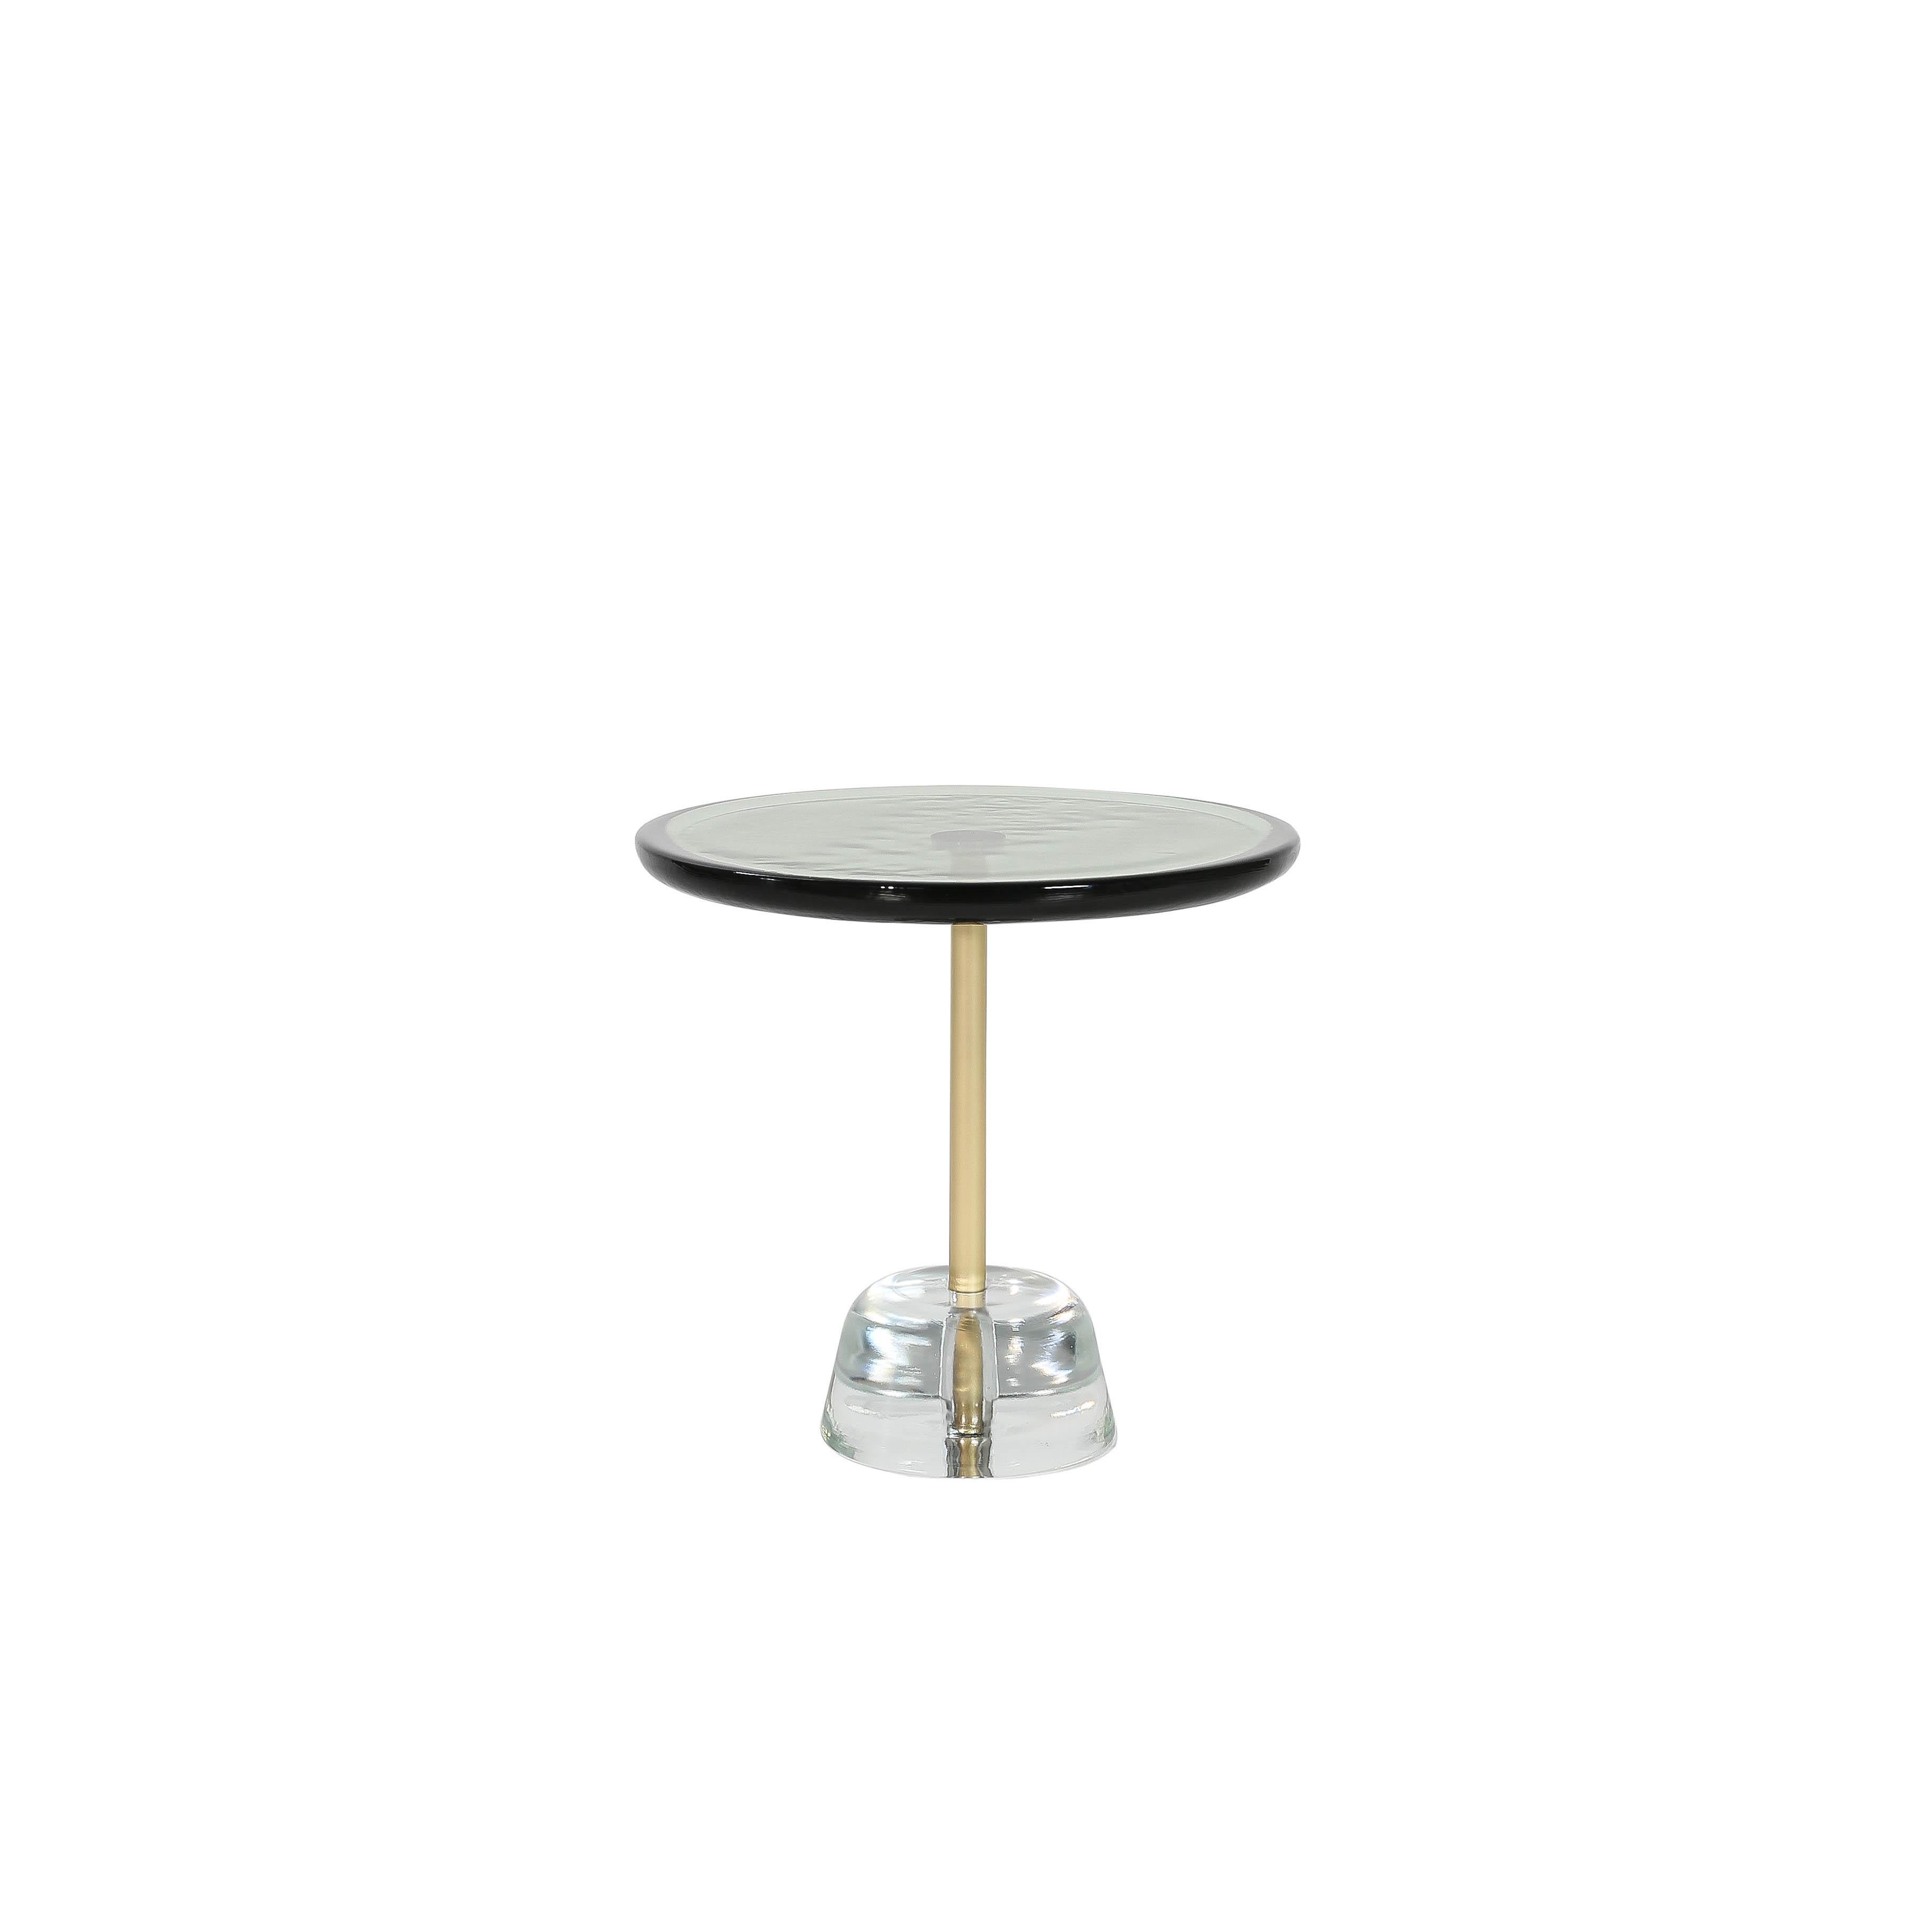 Pina low green brass transparent side Table by Pulpo
Dimensions: D44 x H42 cm
Materials: glass; brass and steel

Also available in different colours. Please contact us.

Sebastian Herkner’s distinctively tall, skinny side table series pina is